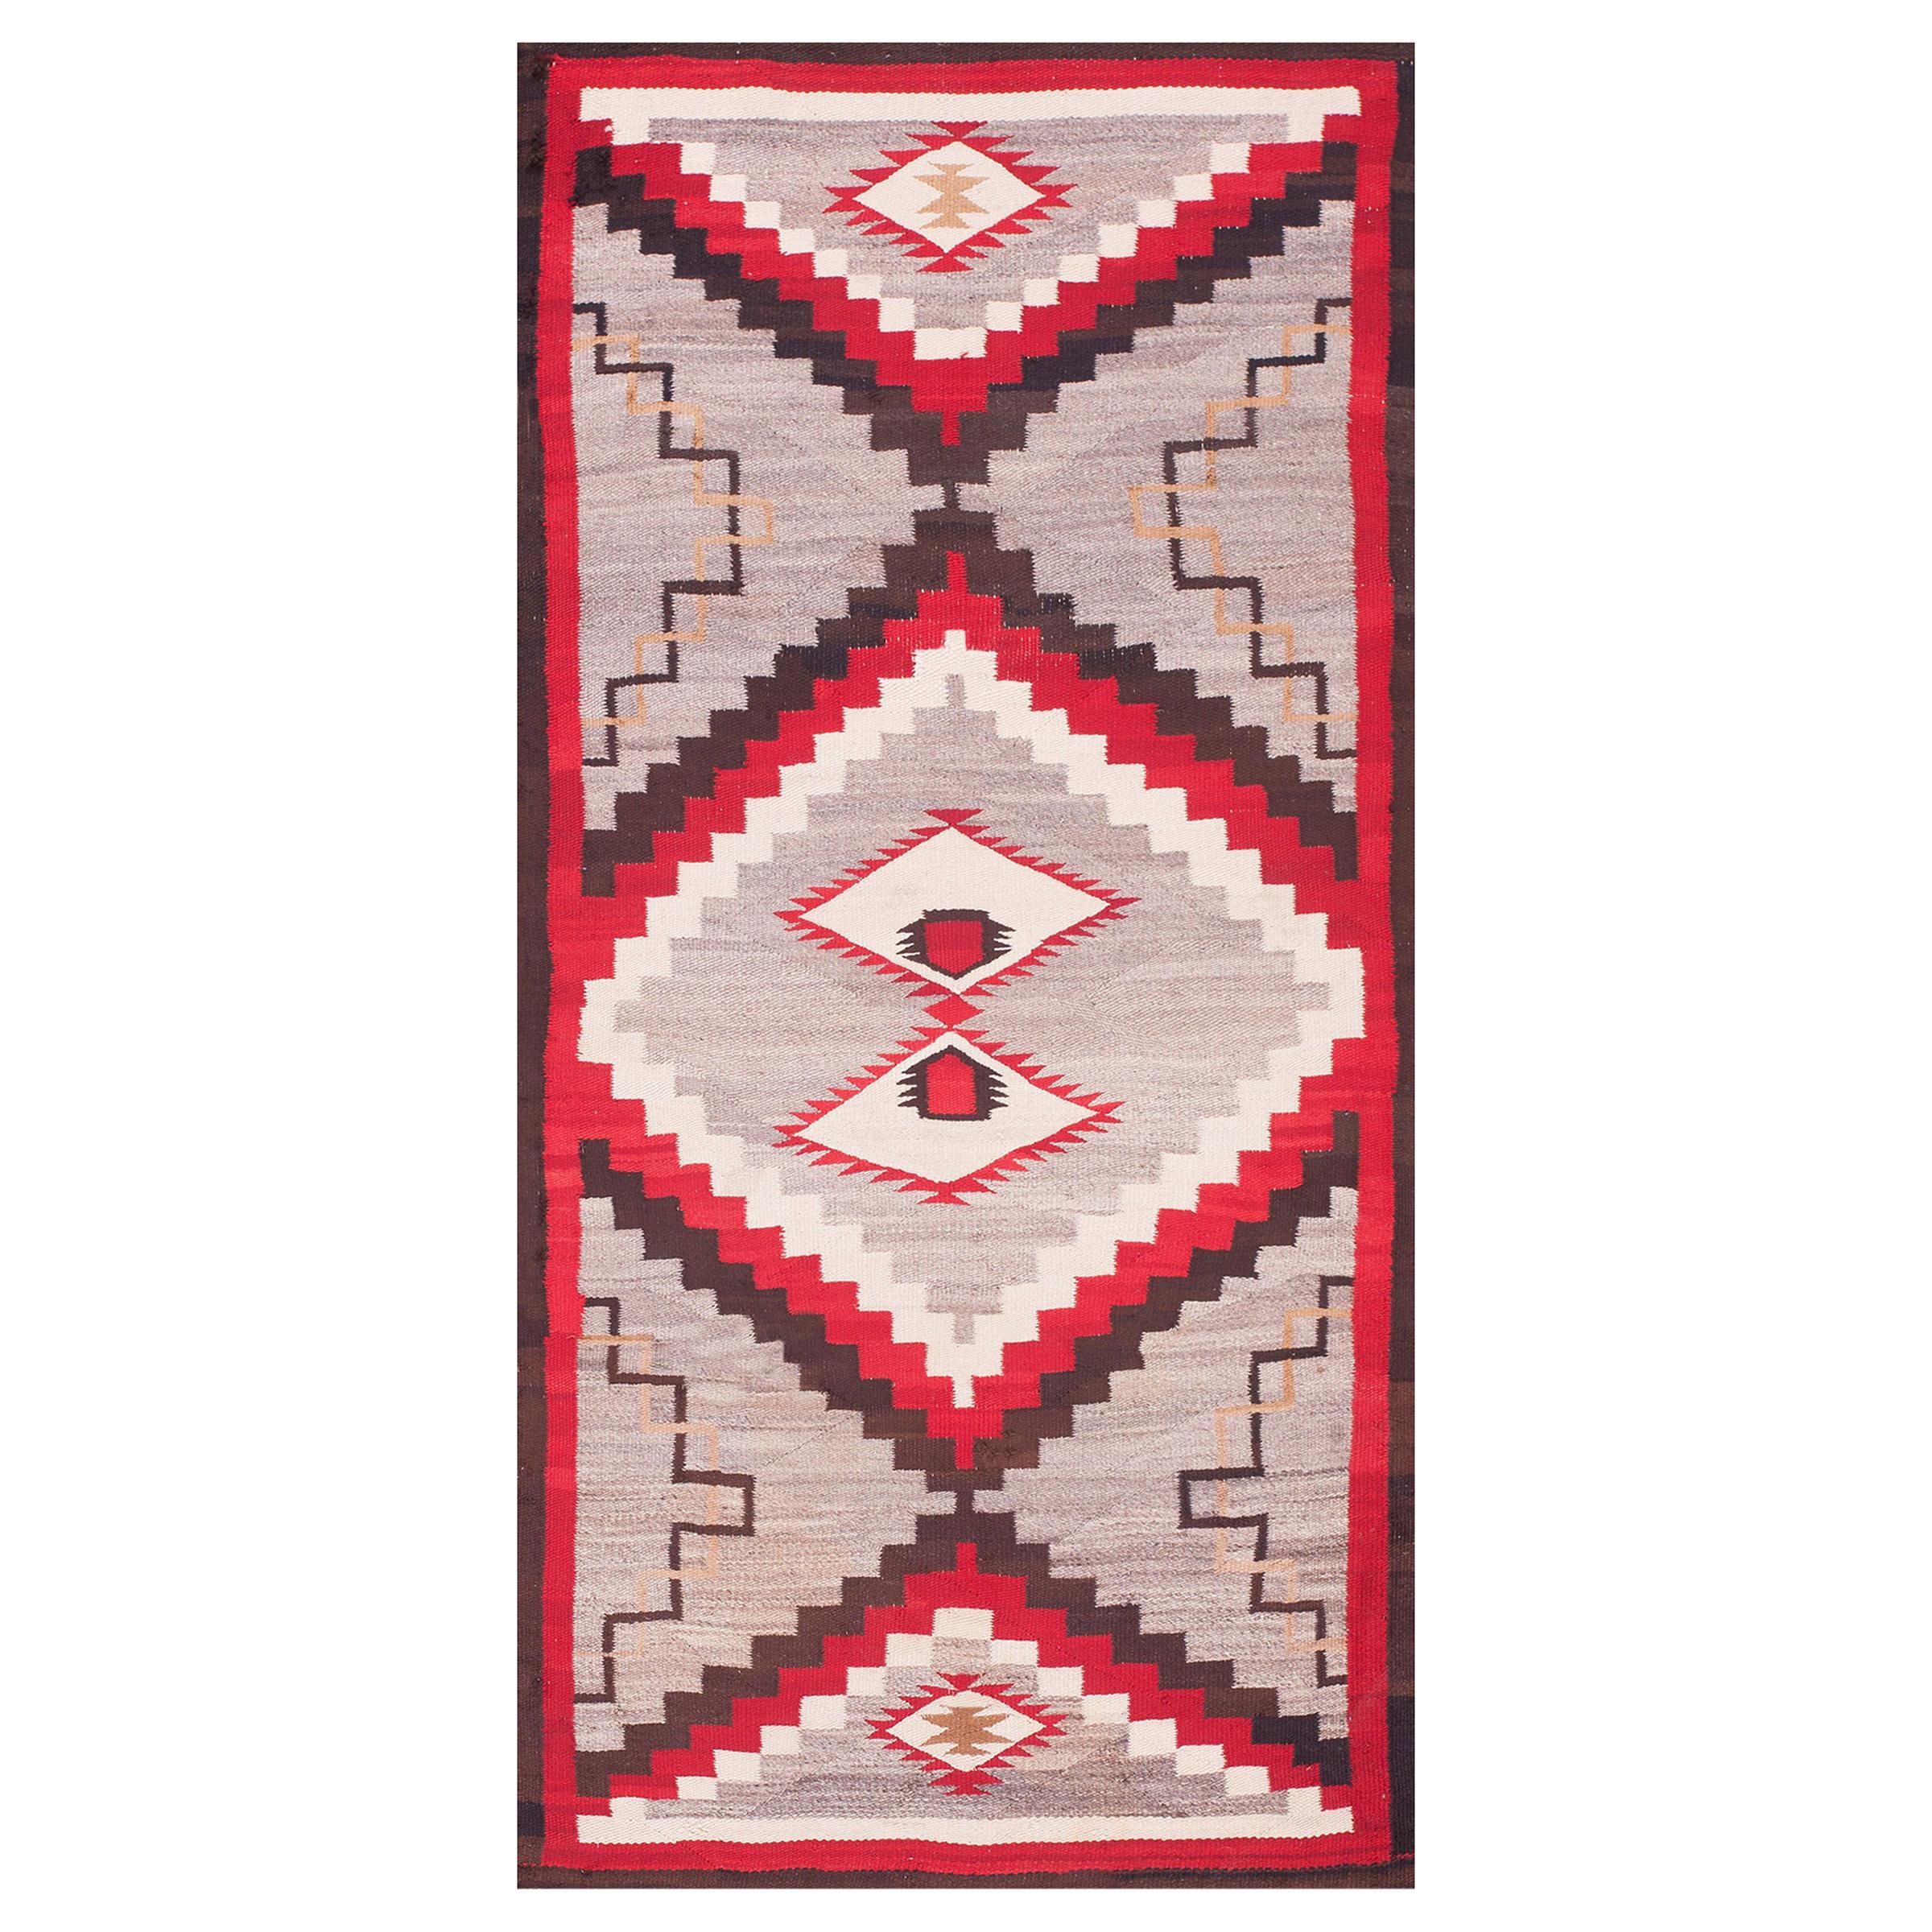 Early 20th Century American Navajo Carpet ( 3'10" x 7'4" - 117 x 224 ) For Sale